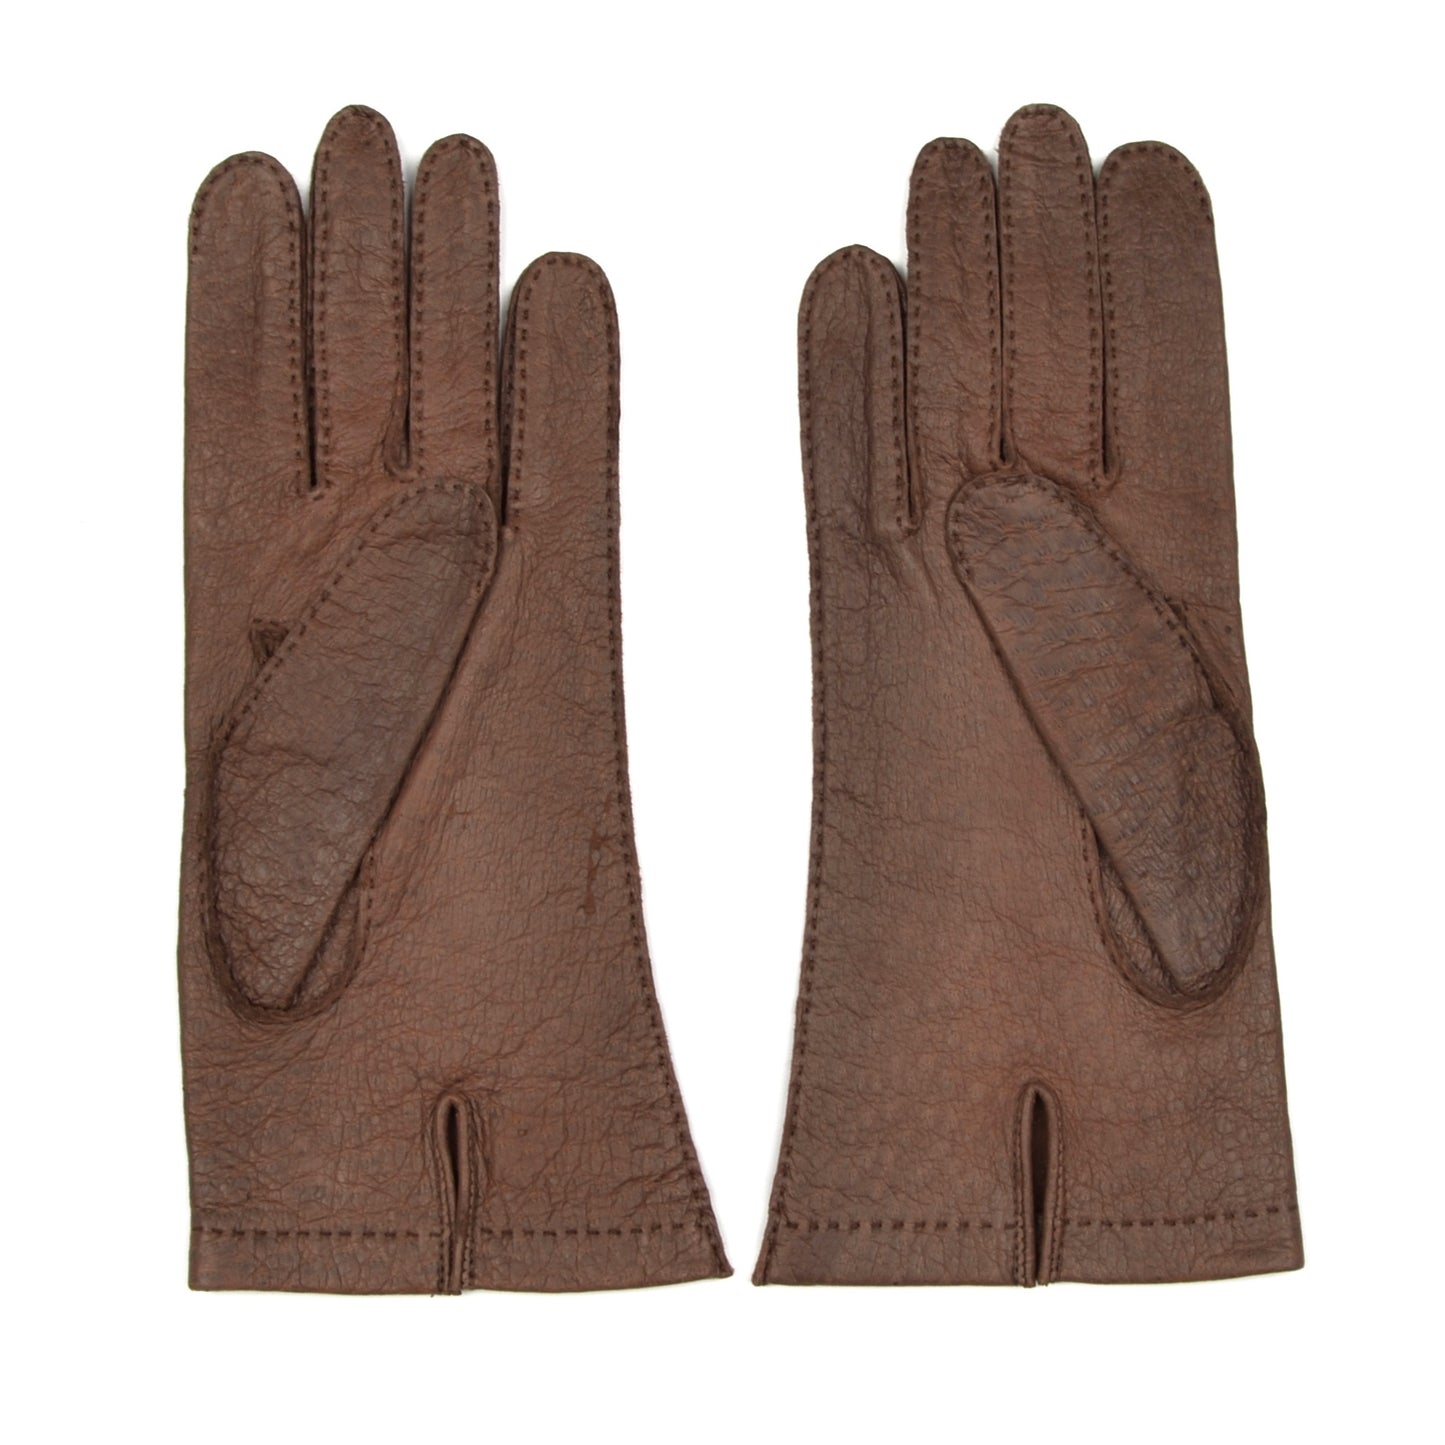 Unlined Peccary Gloves Size 8 1/2 - Dark Brown